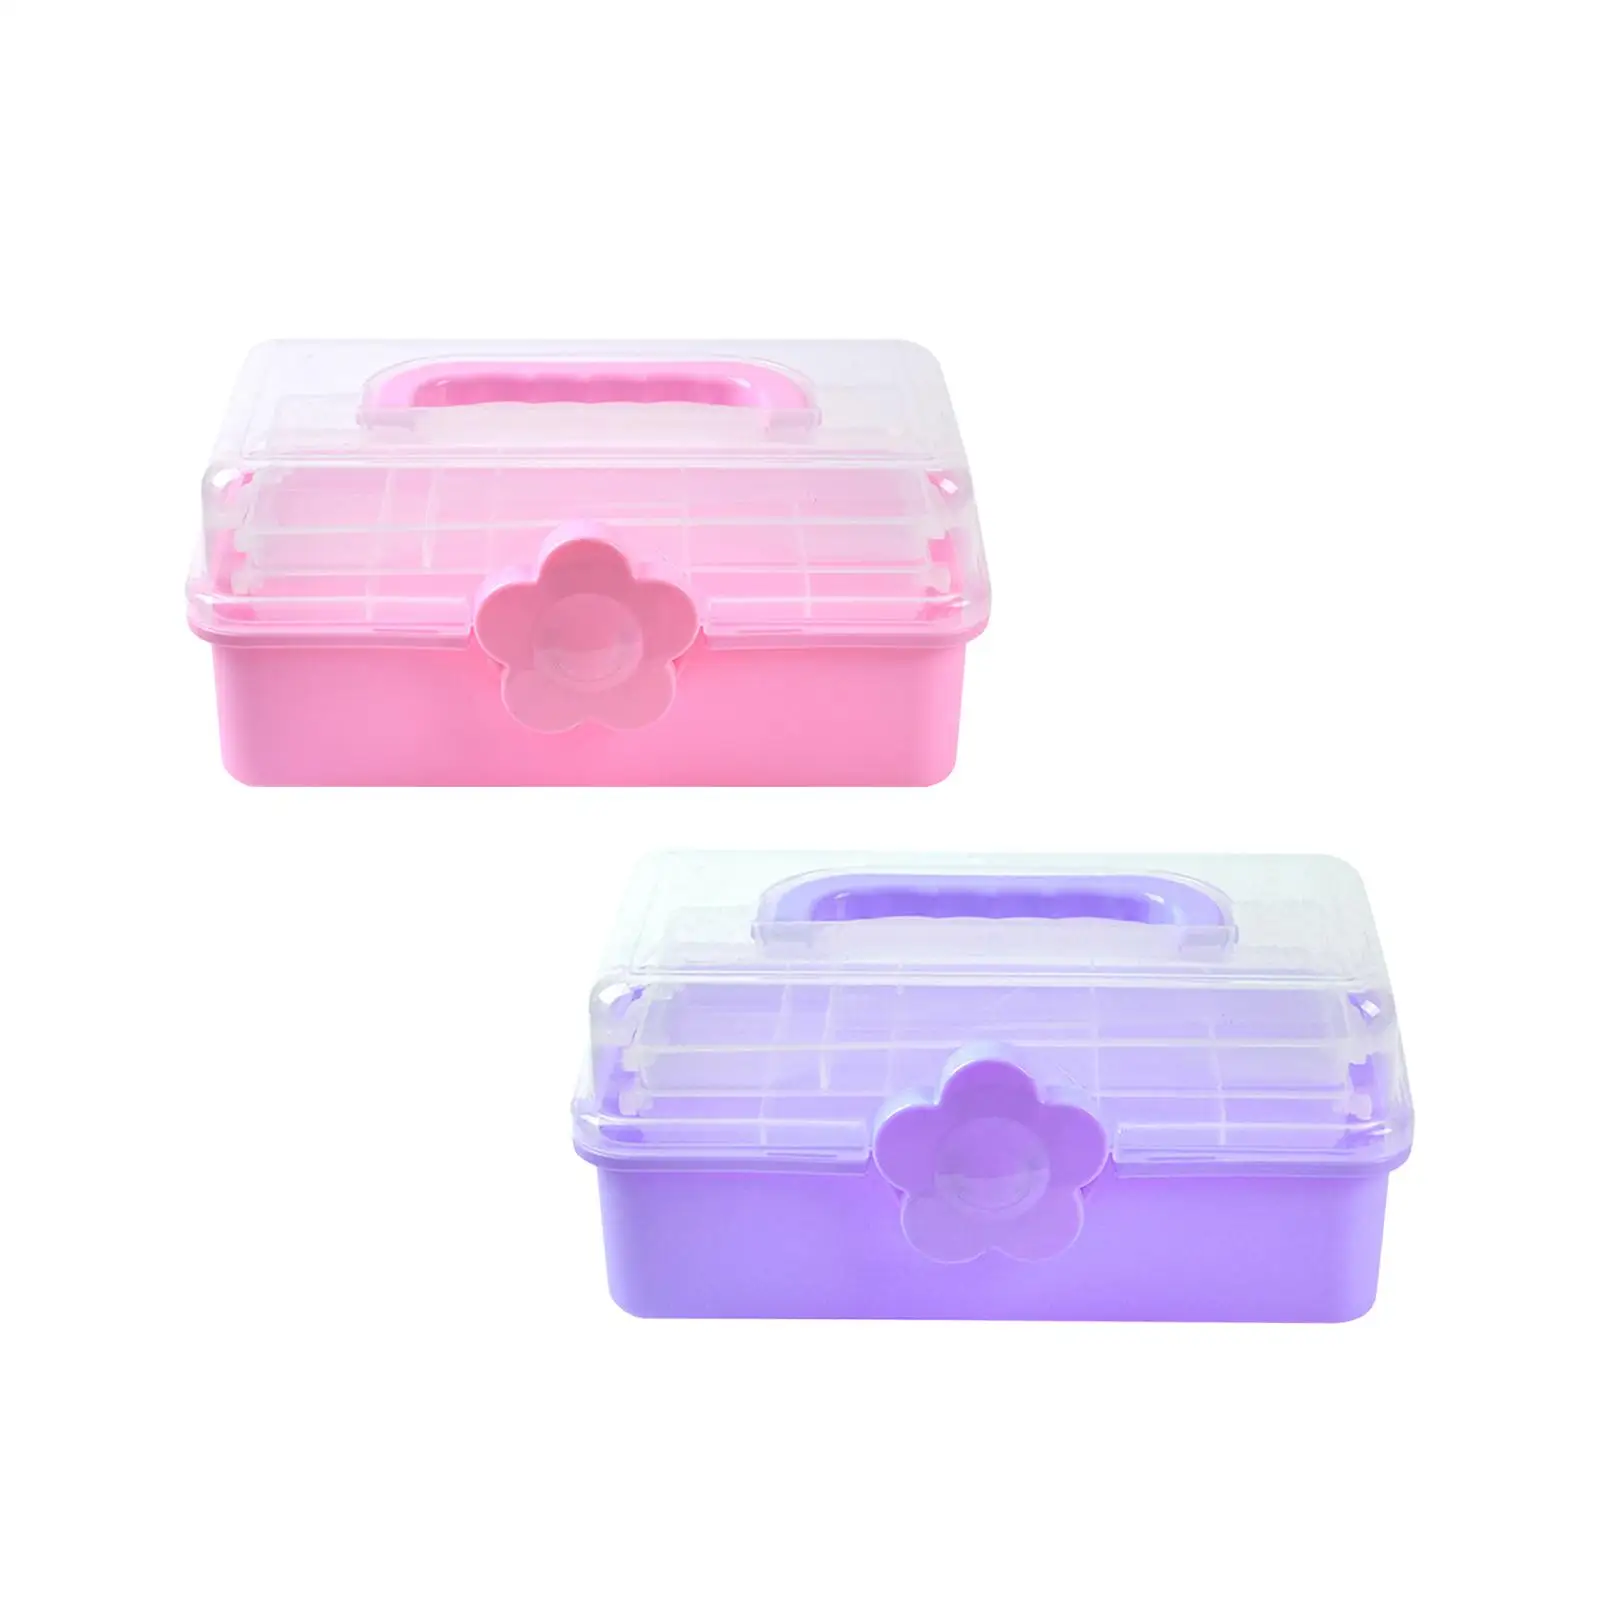 Sewing Supplies Organizer Portable Storage Box Folding Tool Case 3 Tier for Bead Sewing Scrapbooking Items Pencils Art Craft